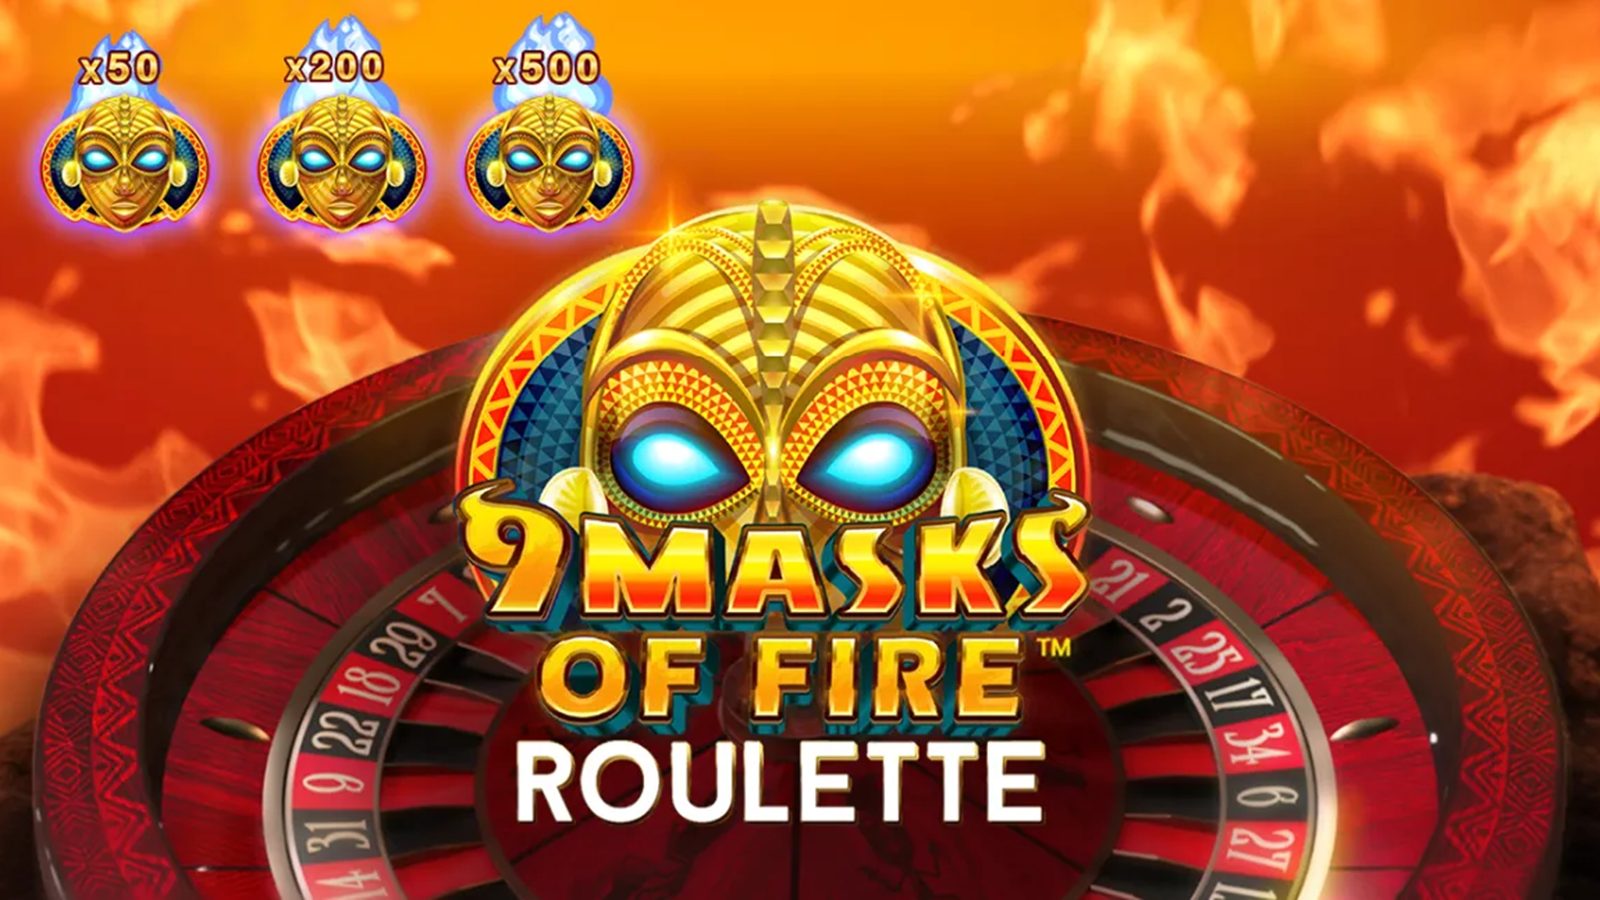 9 Masks of Fire Roulette by Real Dealer Studios